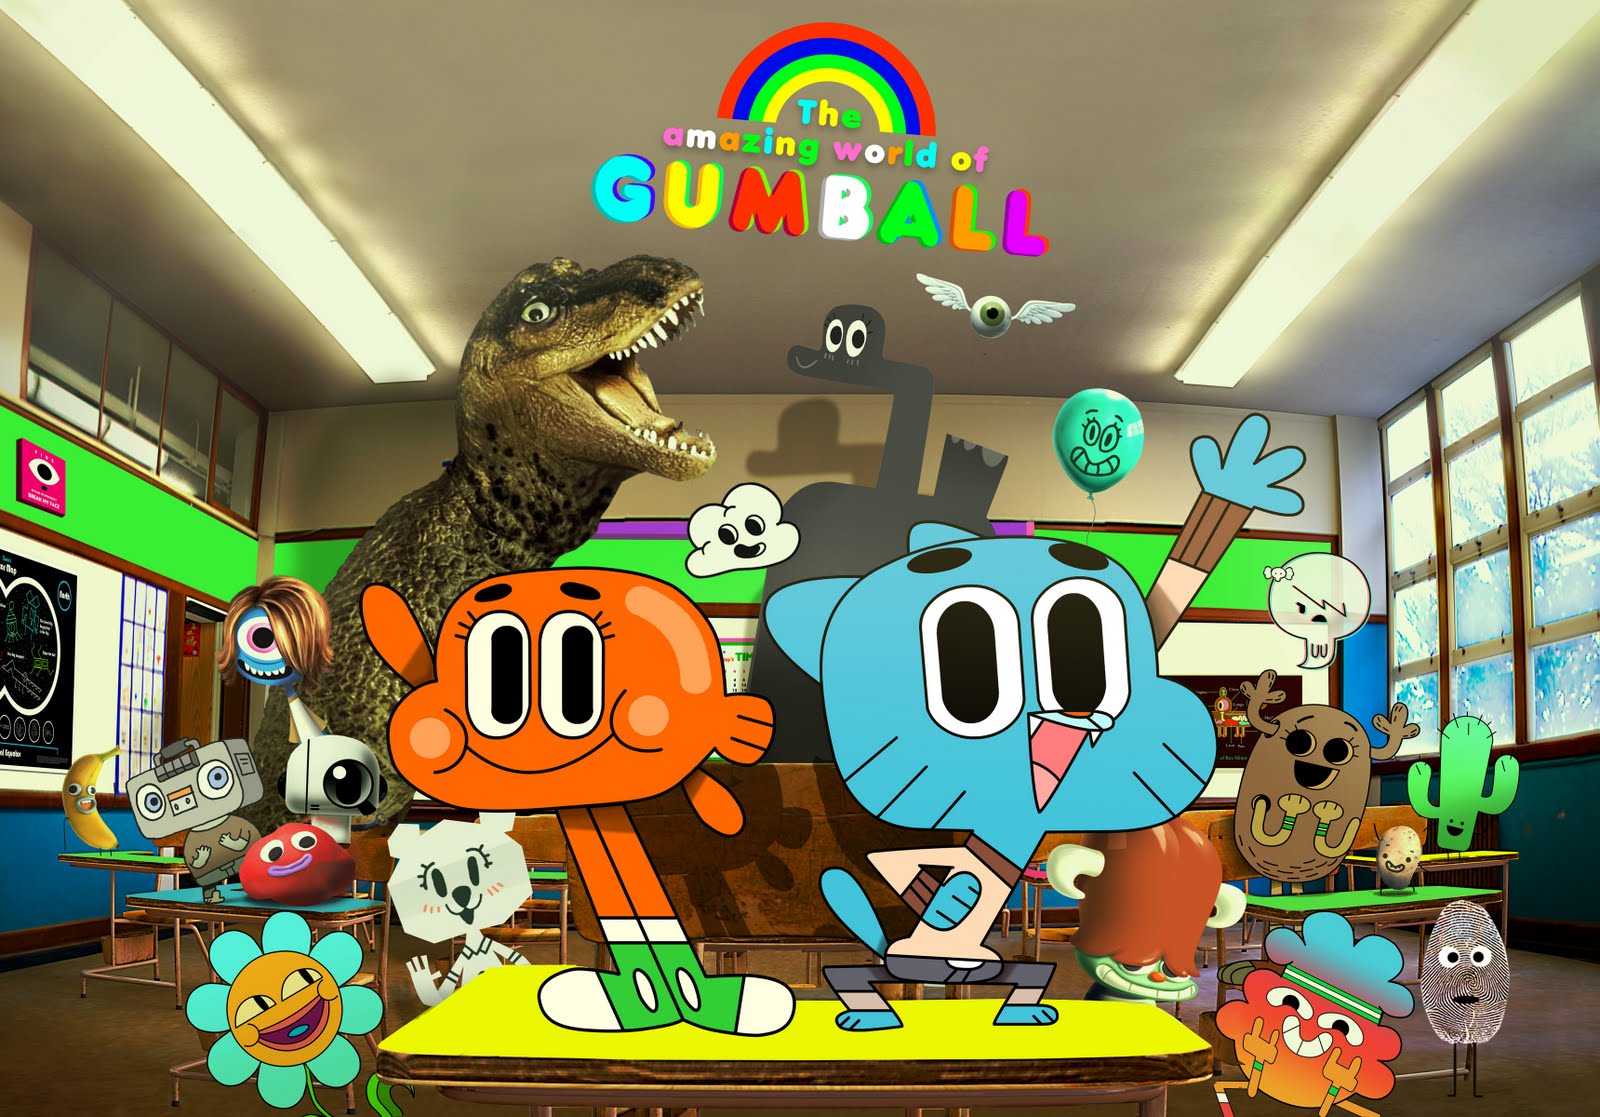 Cartoon Network Game On!, The Amazing World of Gumball Wiki